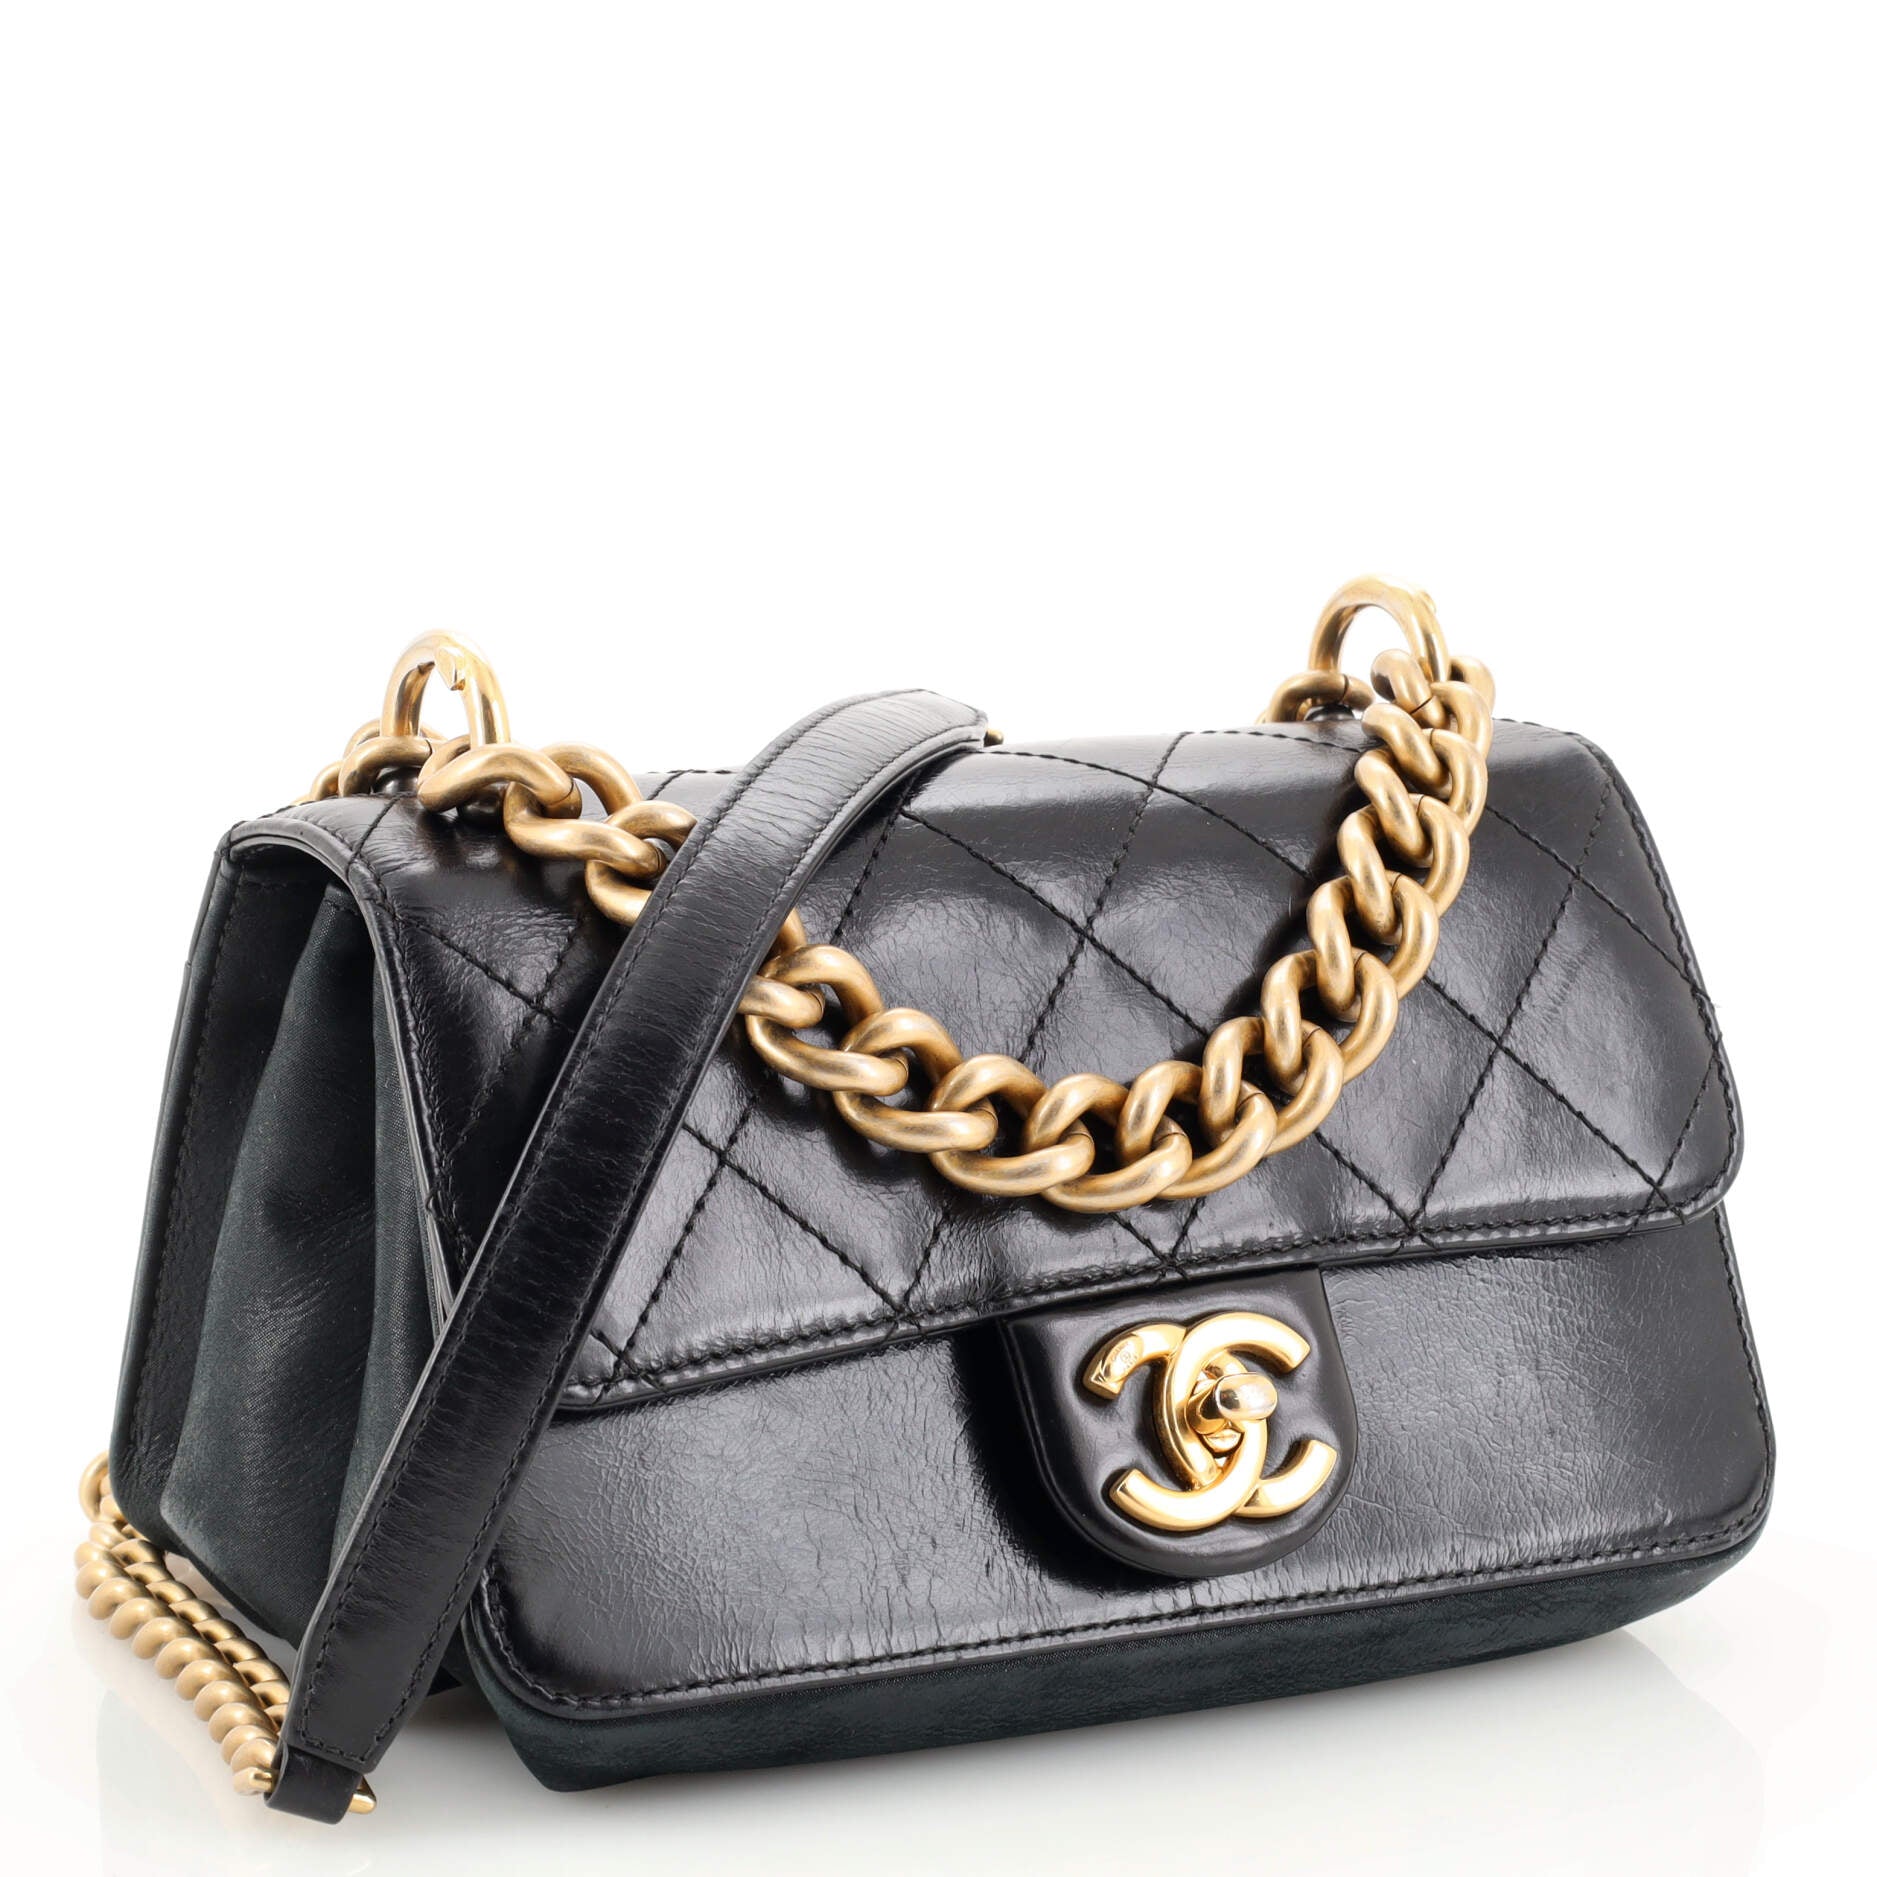 Chanel Black Quilted Leather Small Straight-Lined Shopper Tote